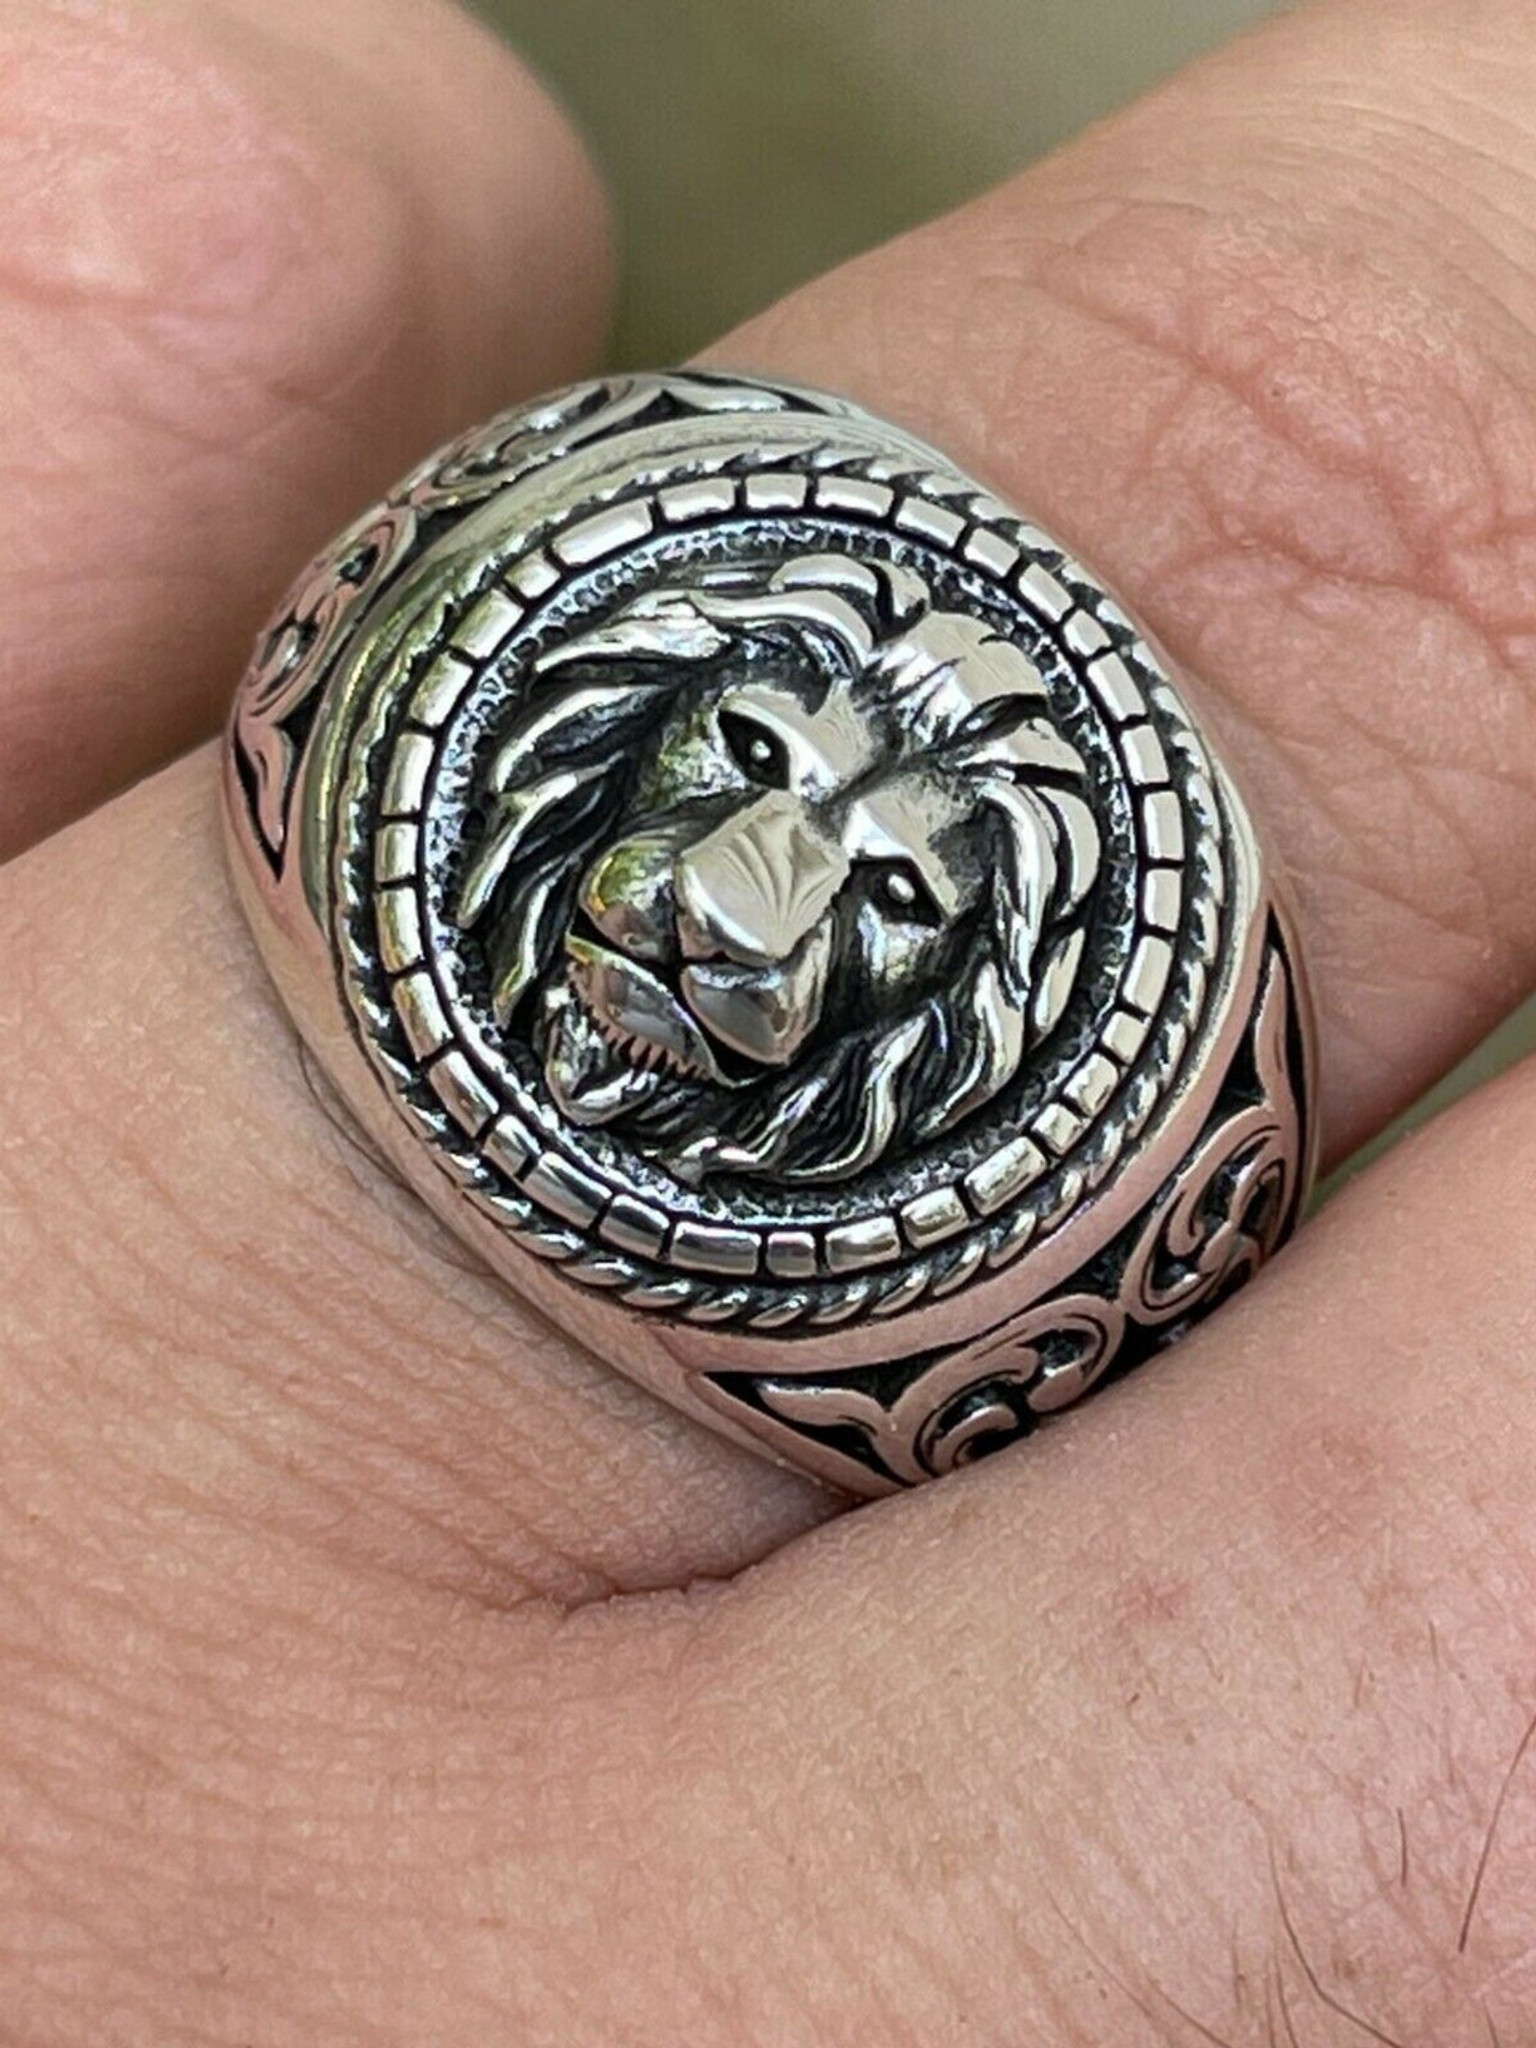 Myshiwu Adjustable Lion Ring 925 Sterling Silver Retro Thai Silver Lion Head  Open Ring for Men Women(Fit for Ring Size 8-11)|Amazon.com